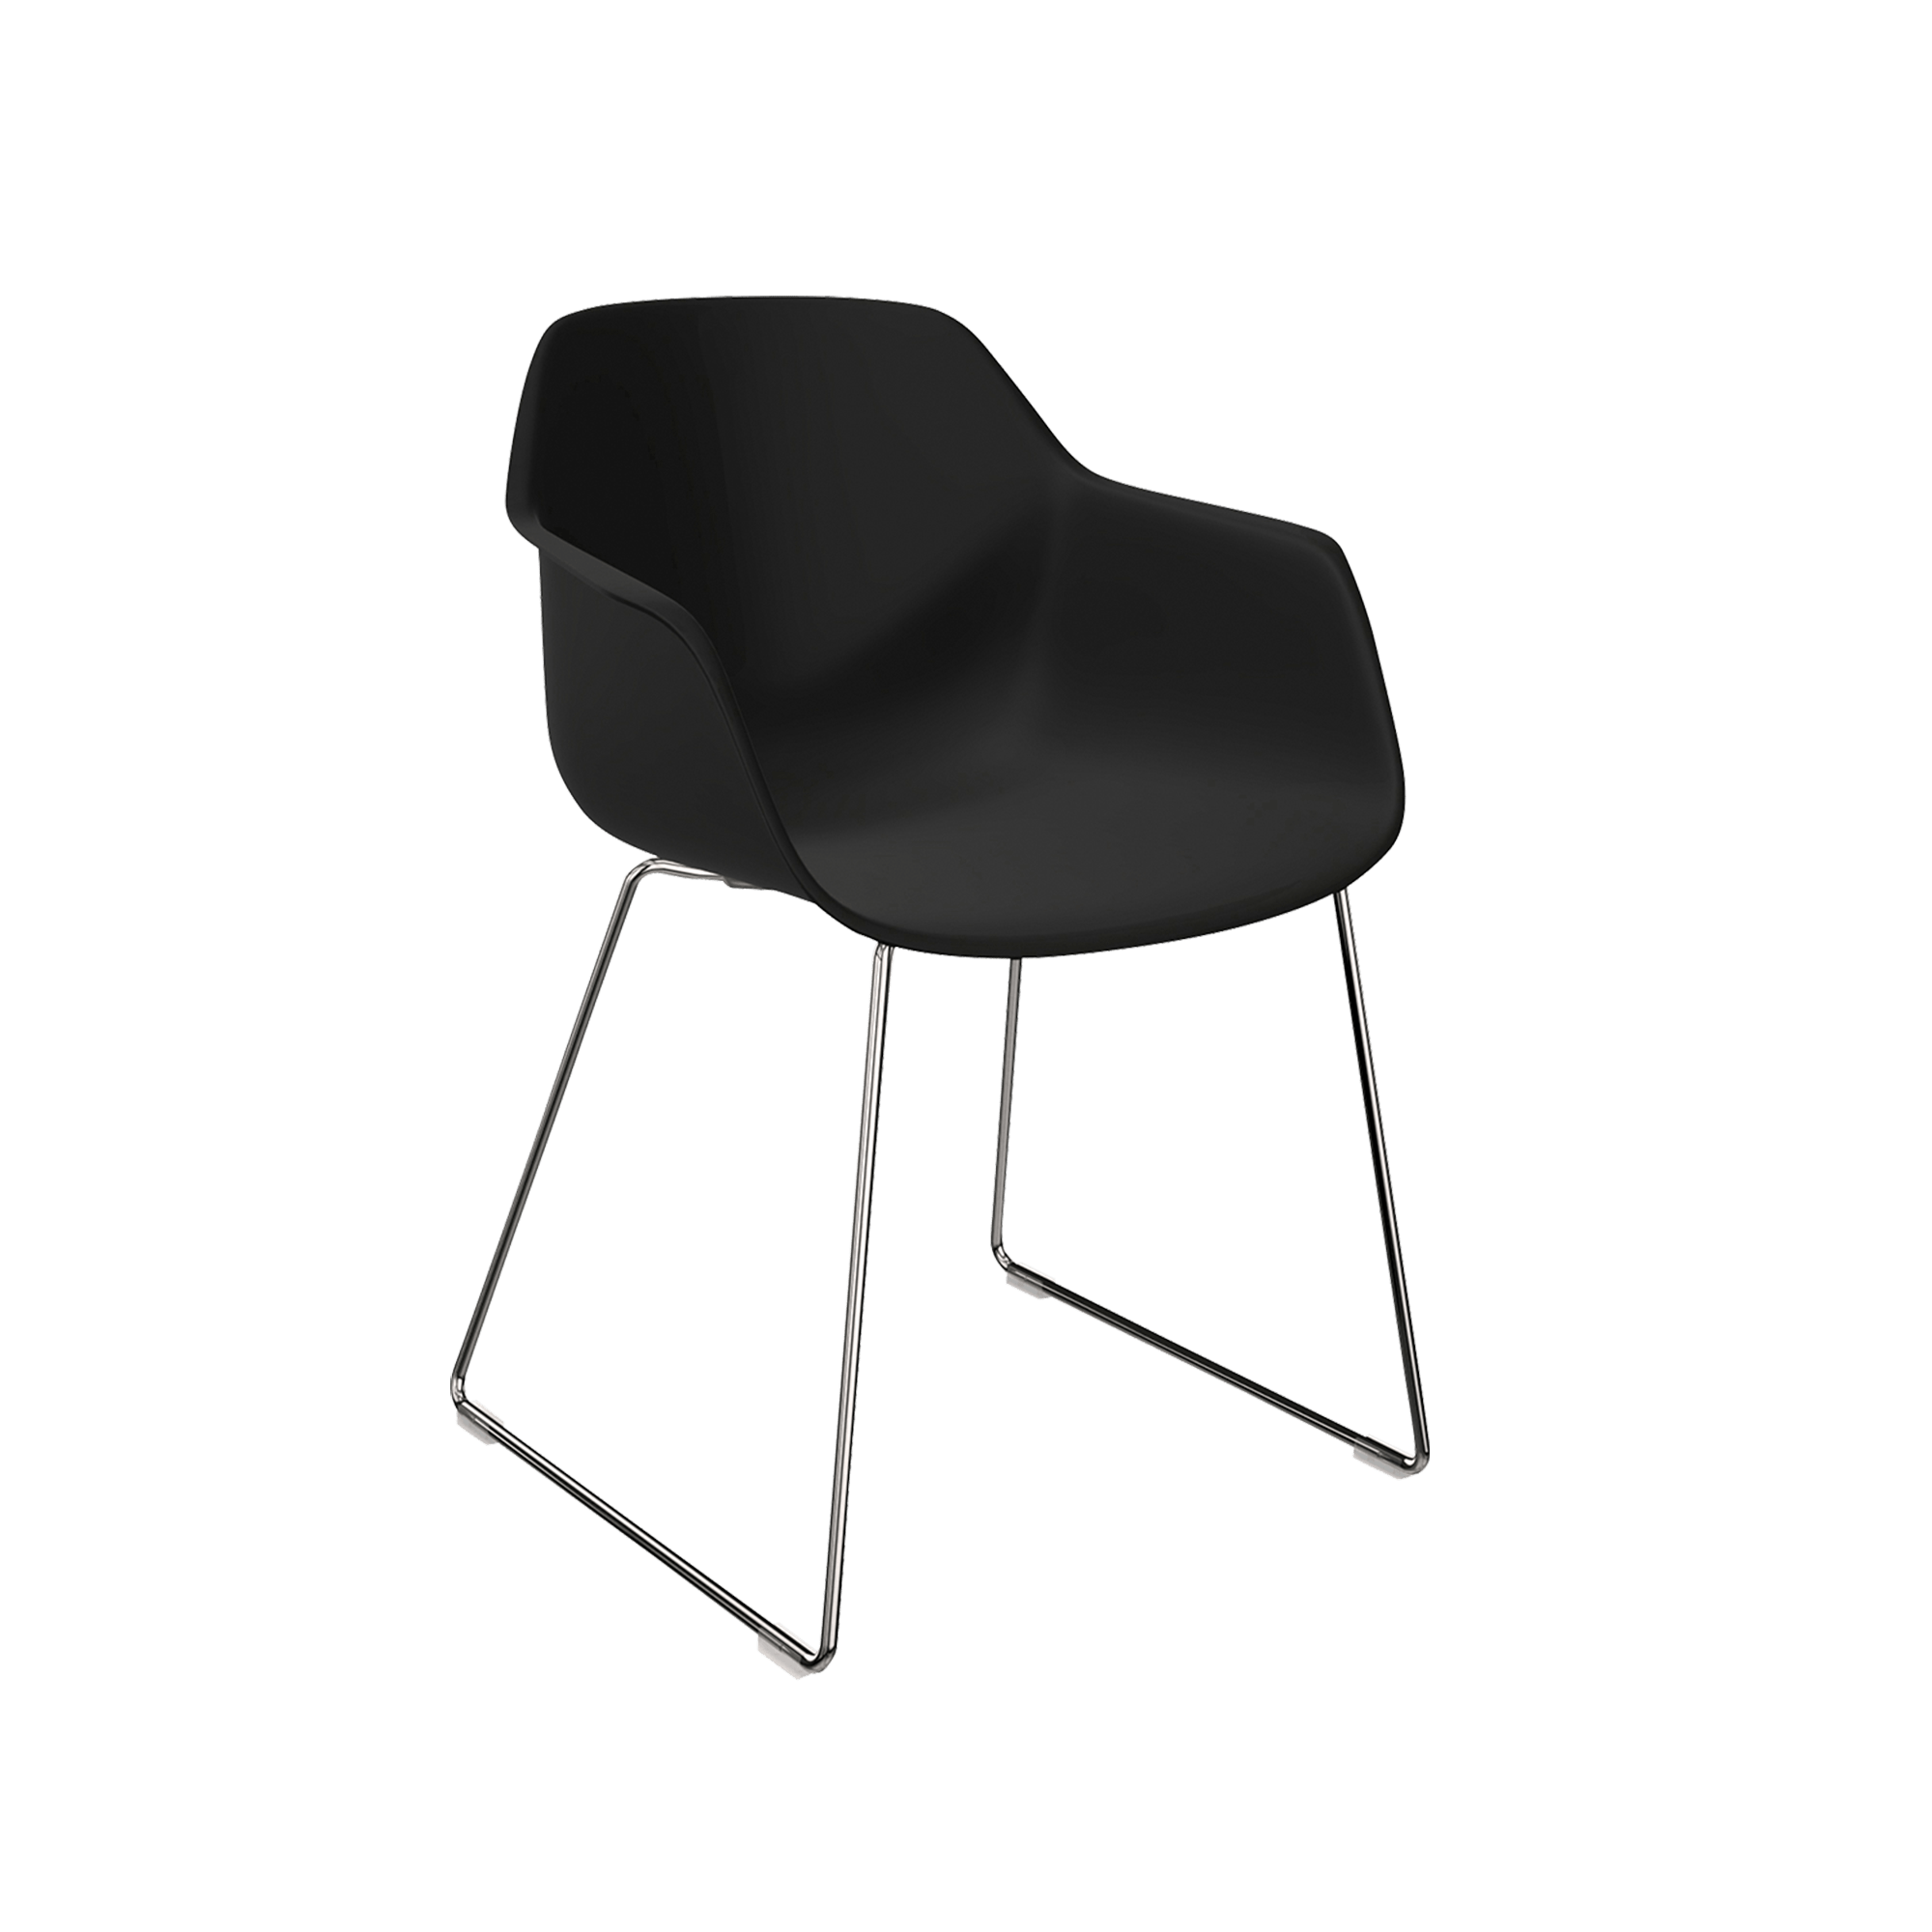 A black chair with 2 legs